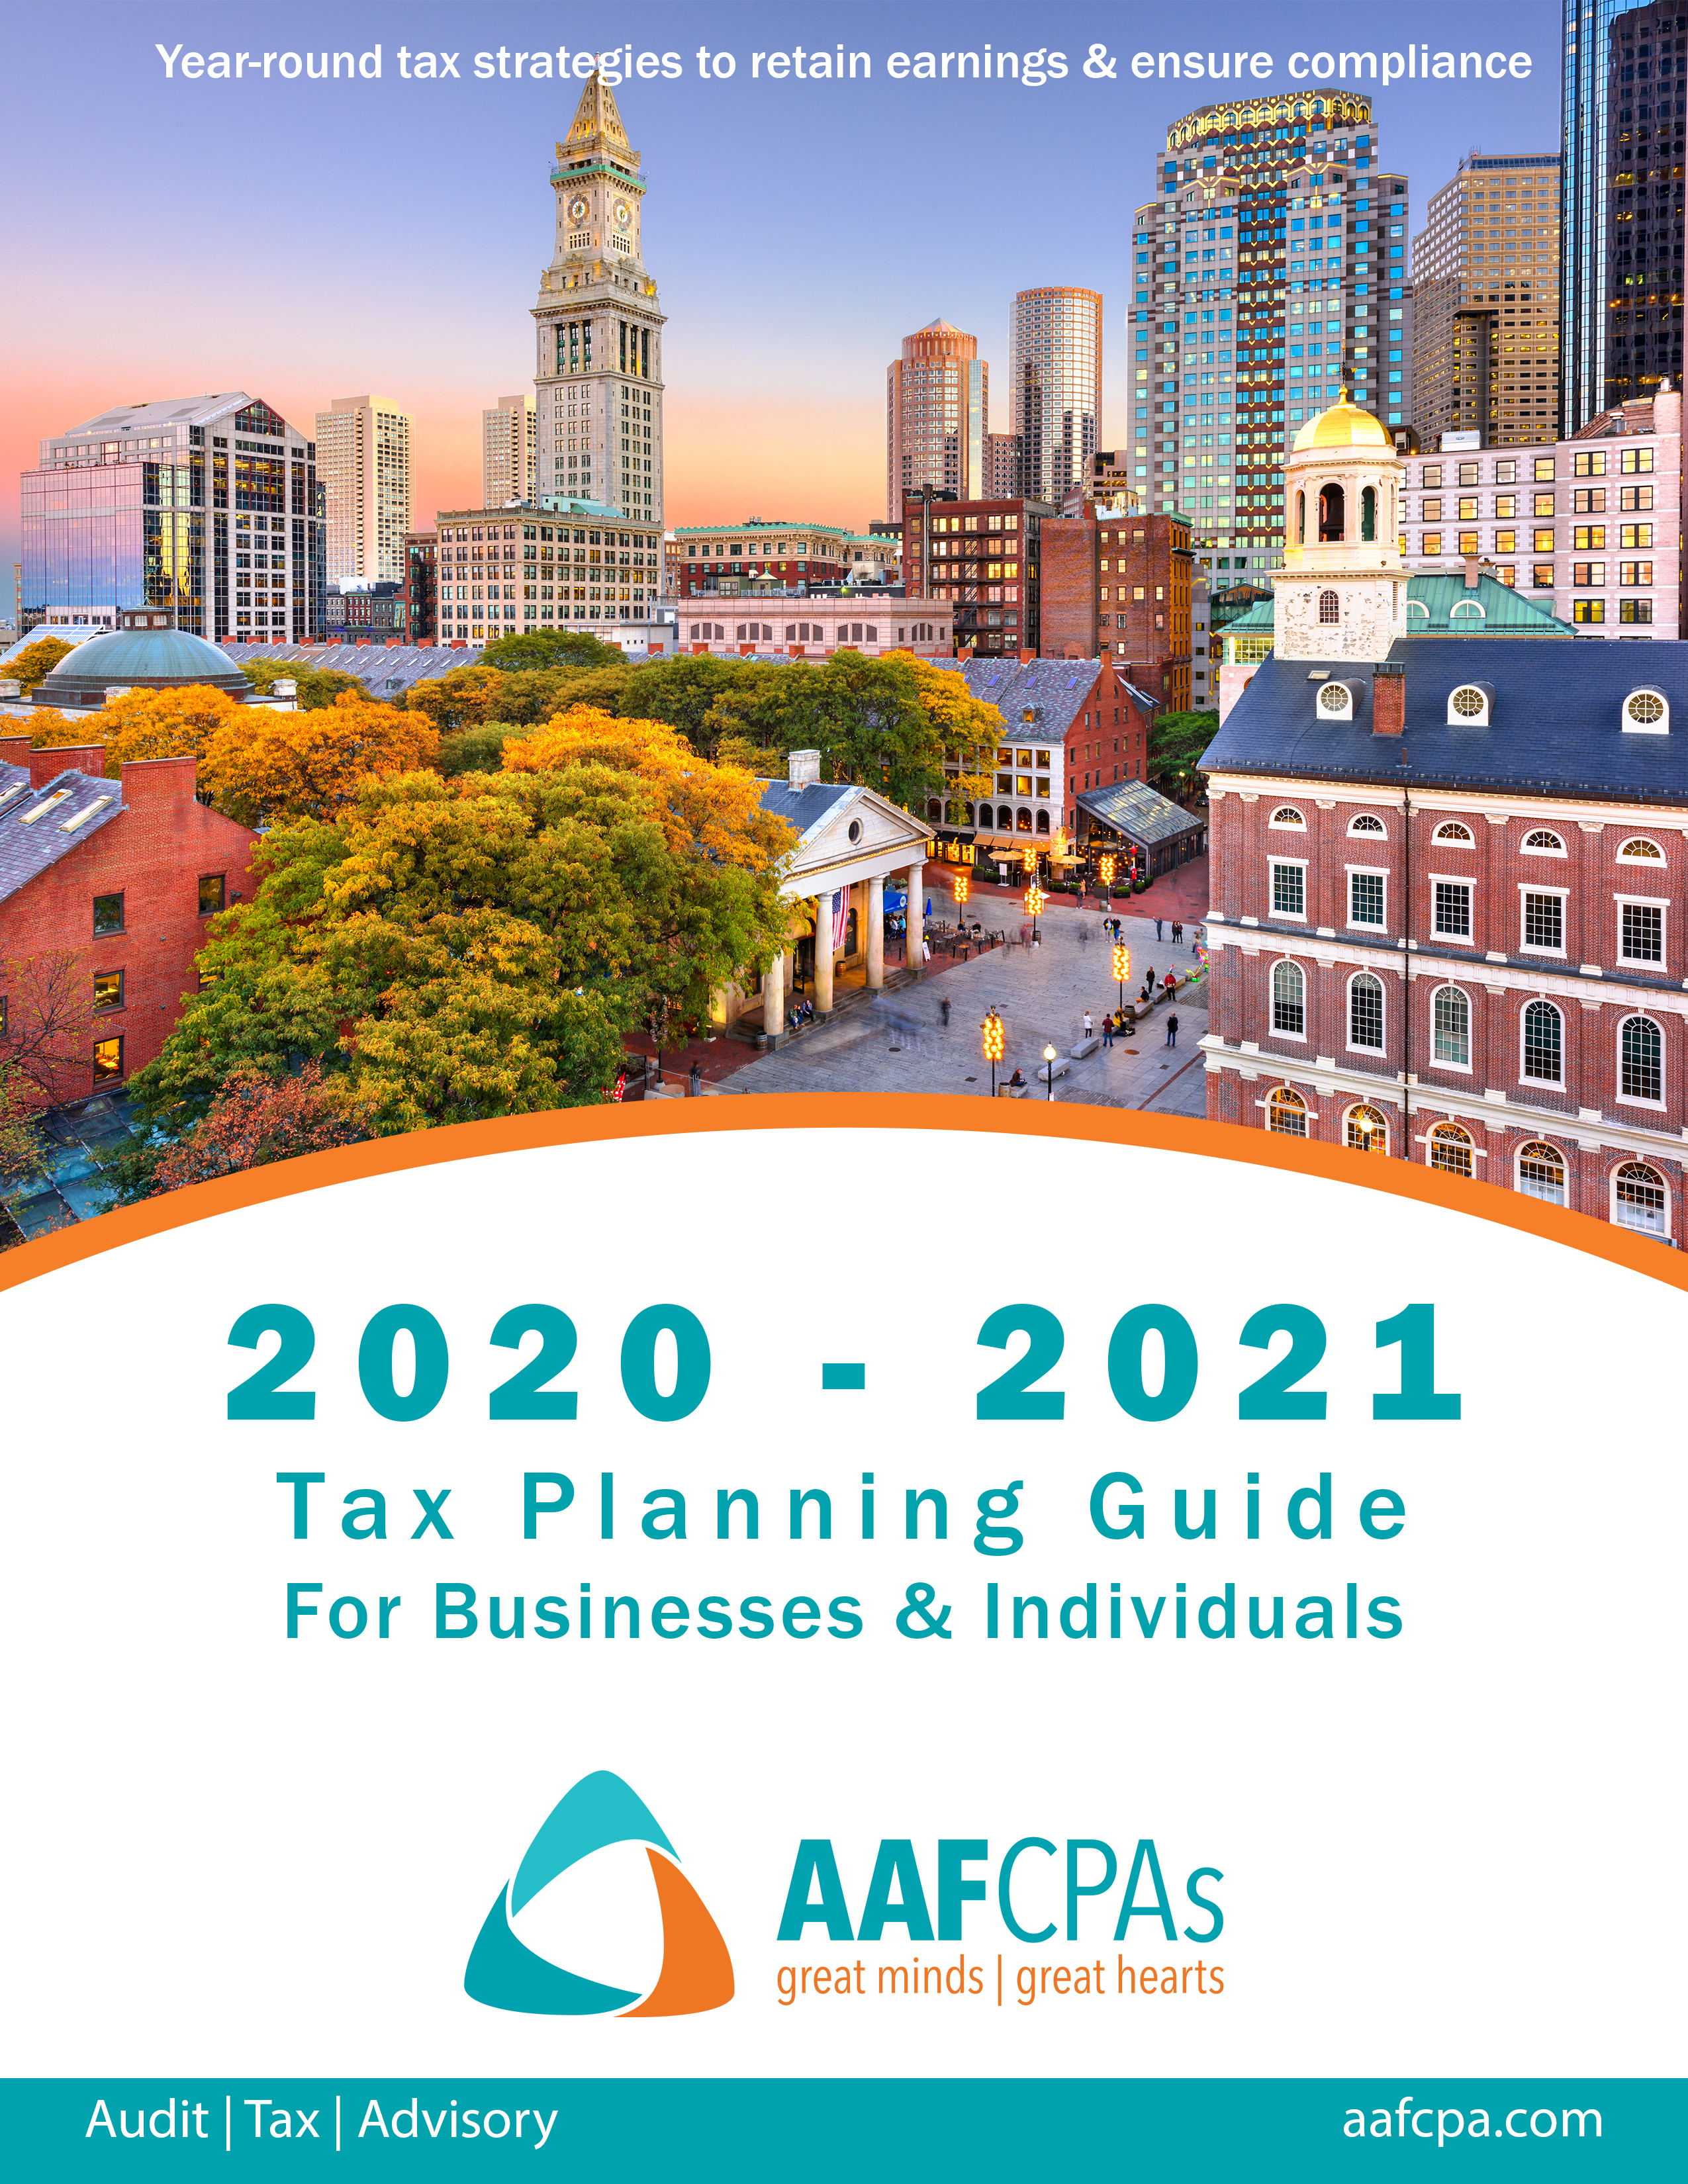 AAFCPAs 2020-2021 Tax Planning Guide for Businesses & Individuals